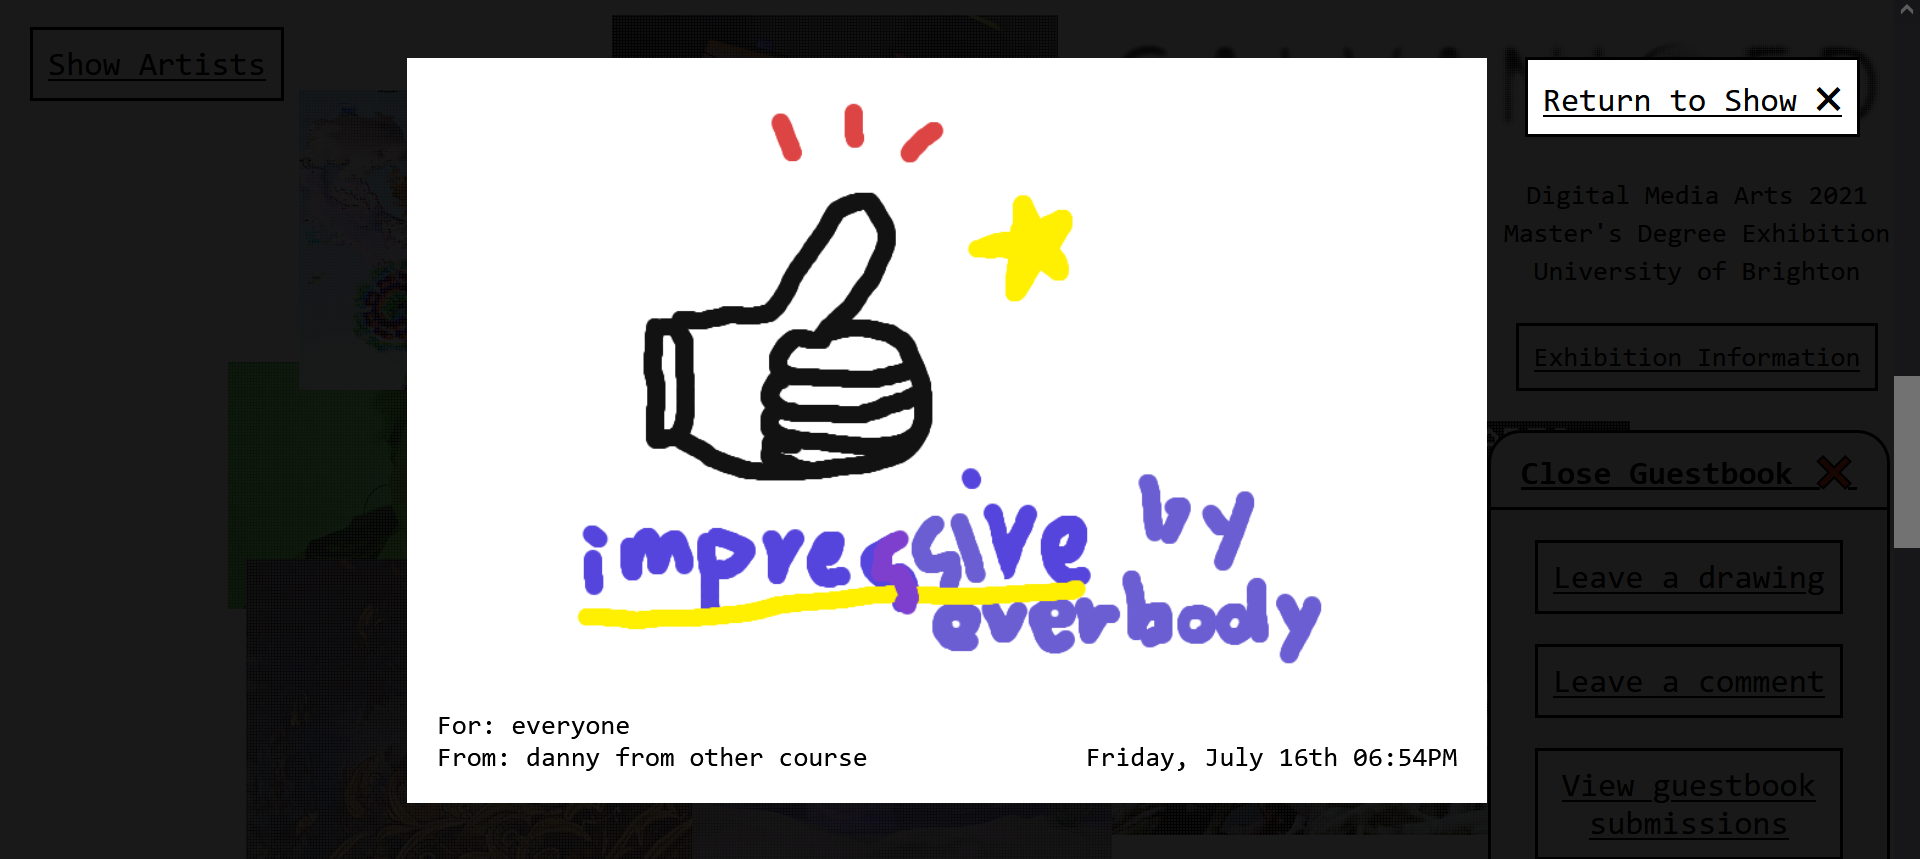 A screenshot of a drawing left on the show website. It contains a thumbs up, scribbled with a clunky brush, and the words Good Job